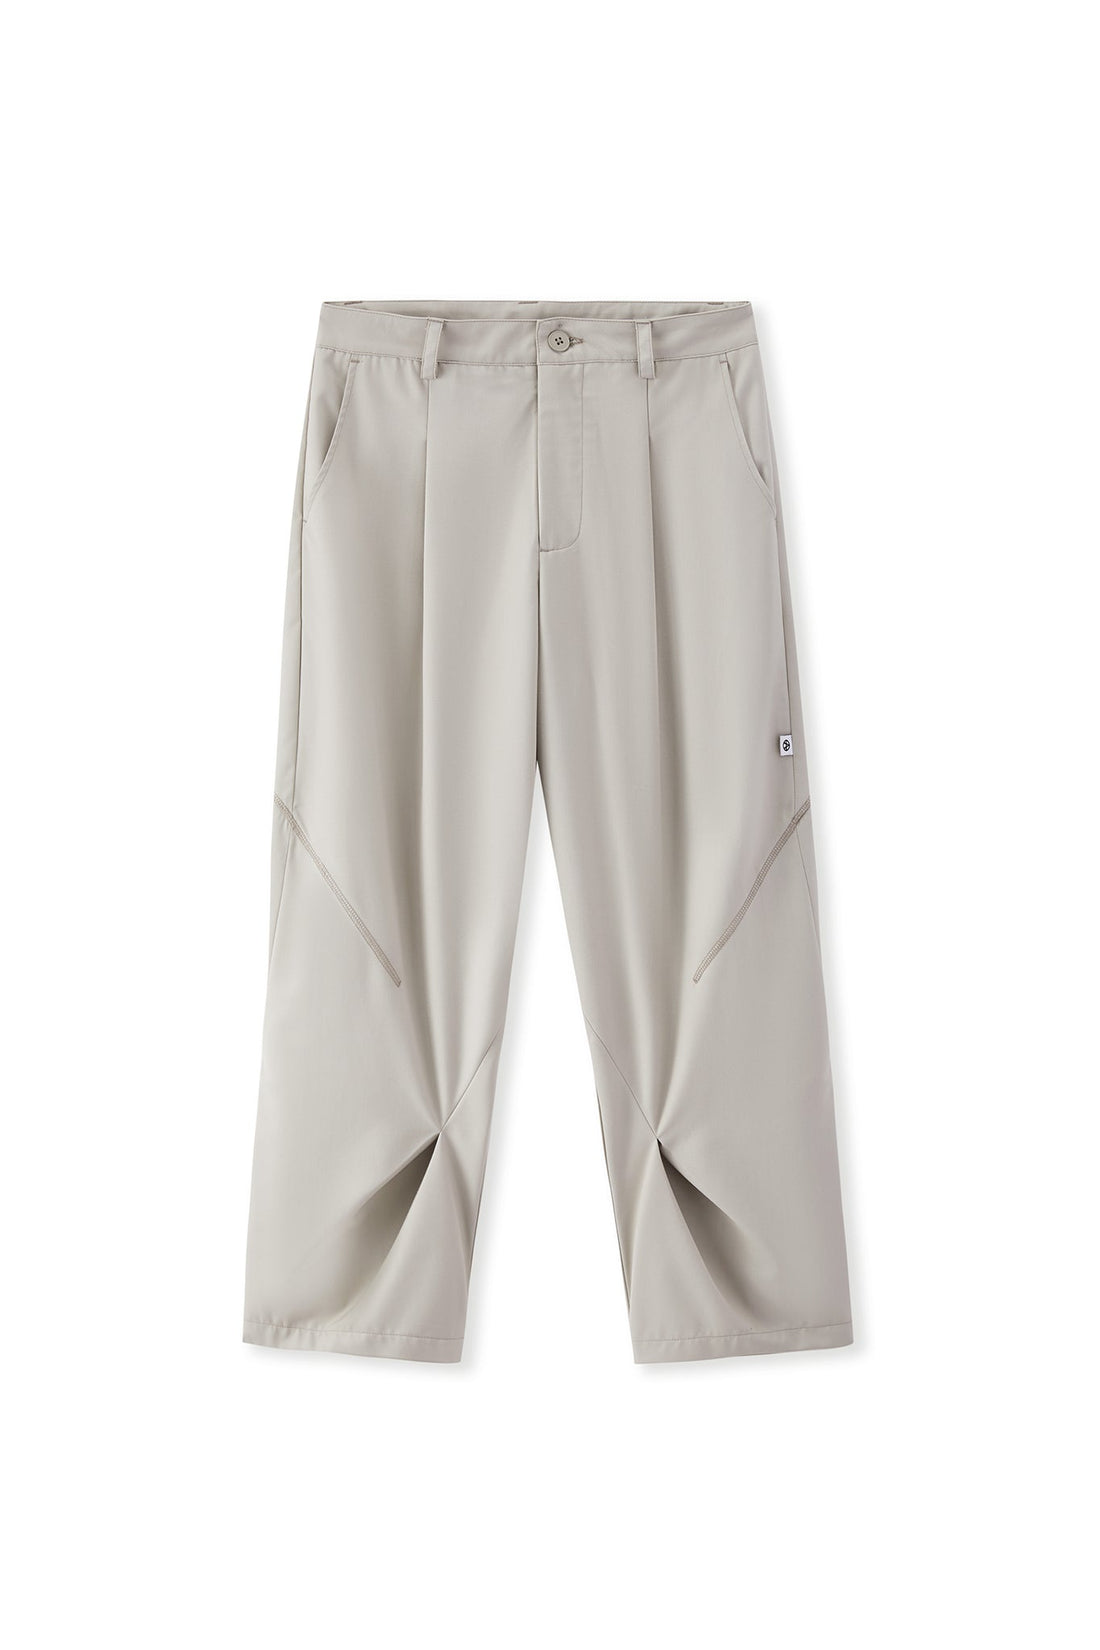 SHADES PANTS LIGHT GREY Acupuncture